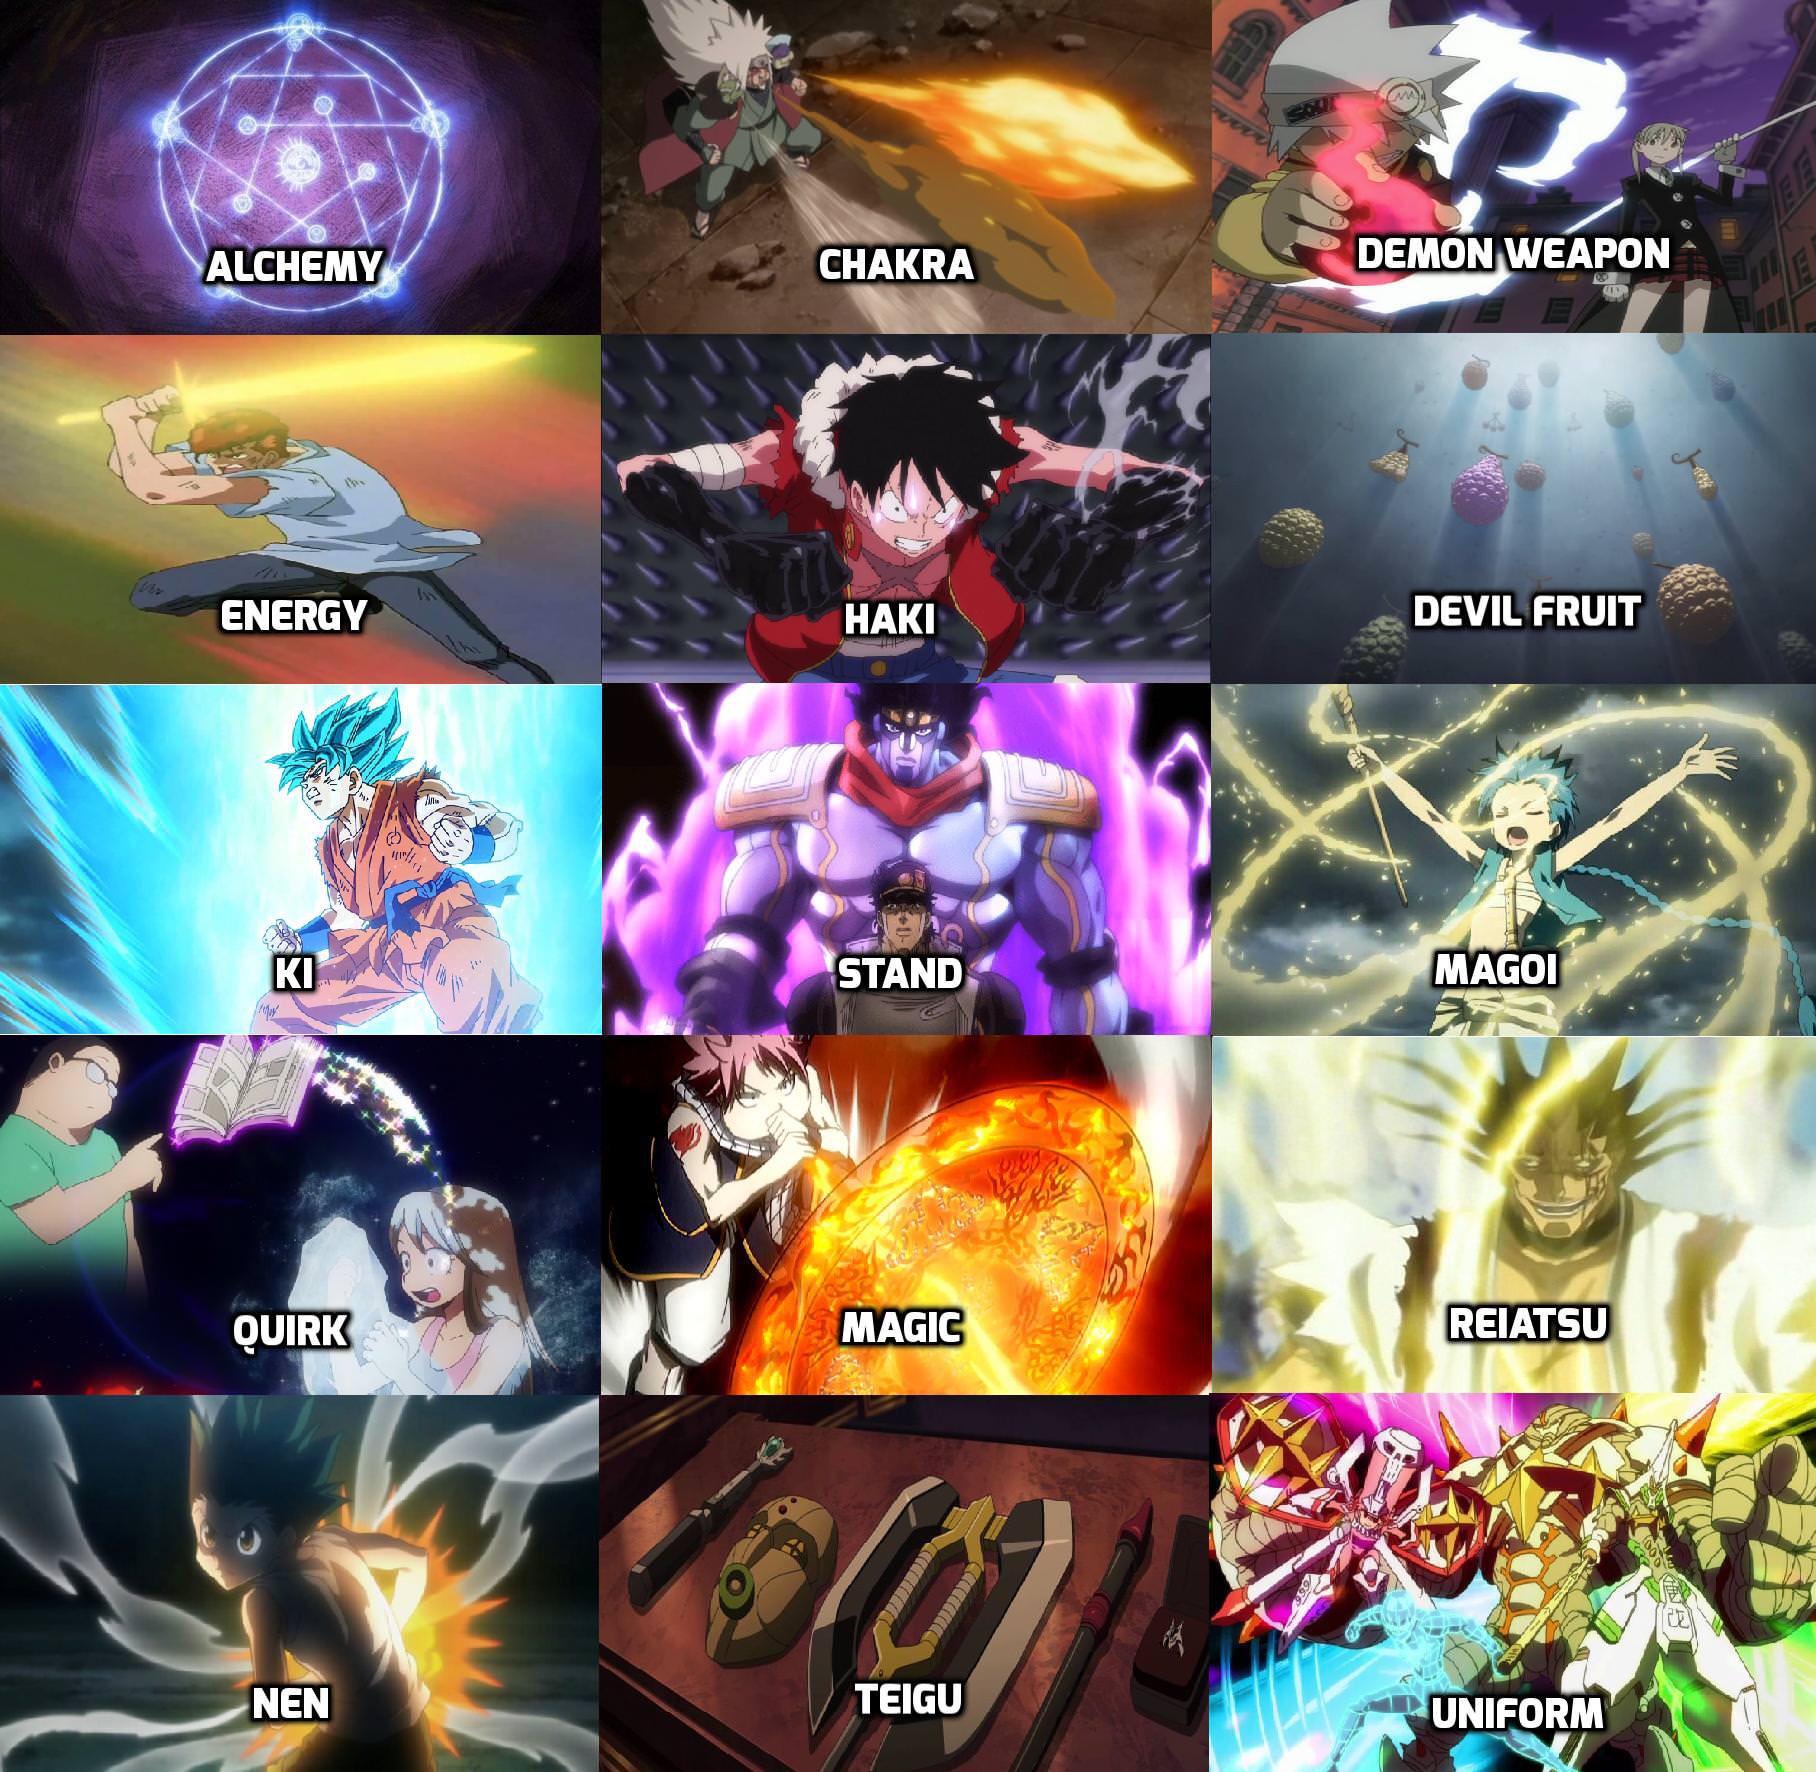 10 Most Balanced Power Systems In Shonen Anime Ranked